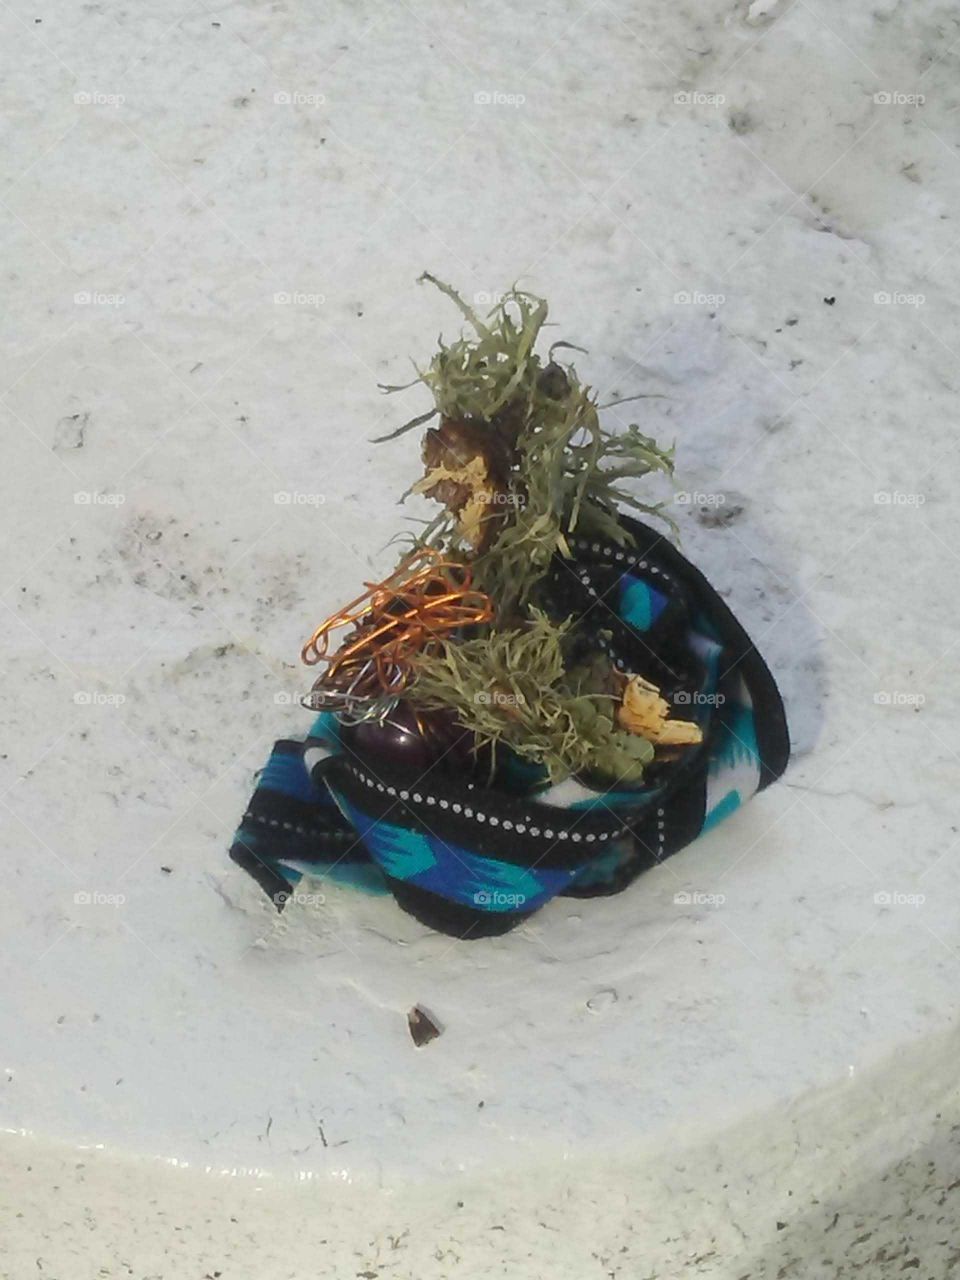 Paying respect to the spirt life by a gift offering. French moss with copper and a piece of material is left by a visitor to the cemetery